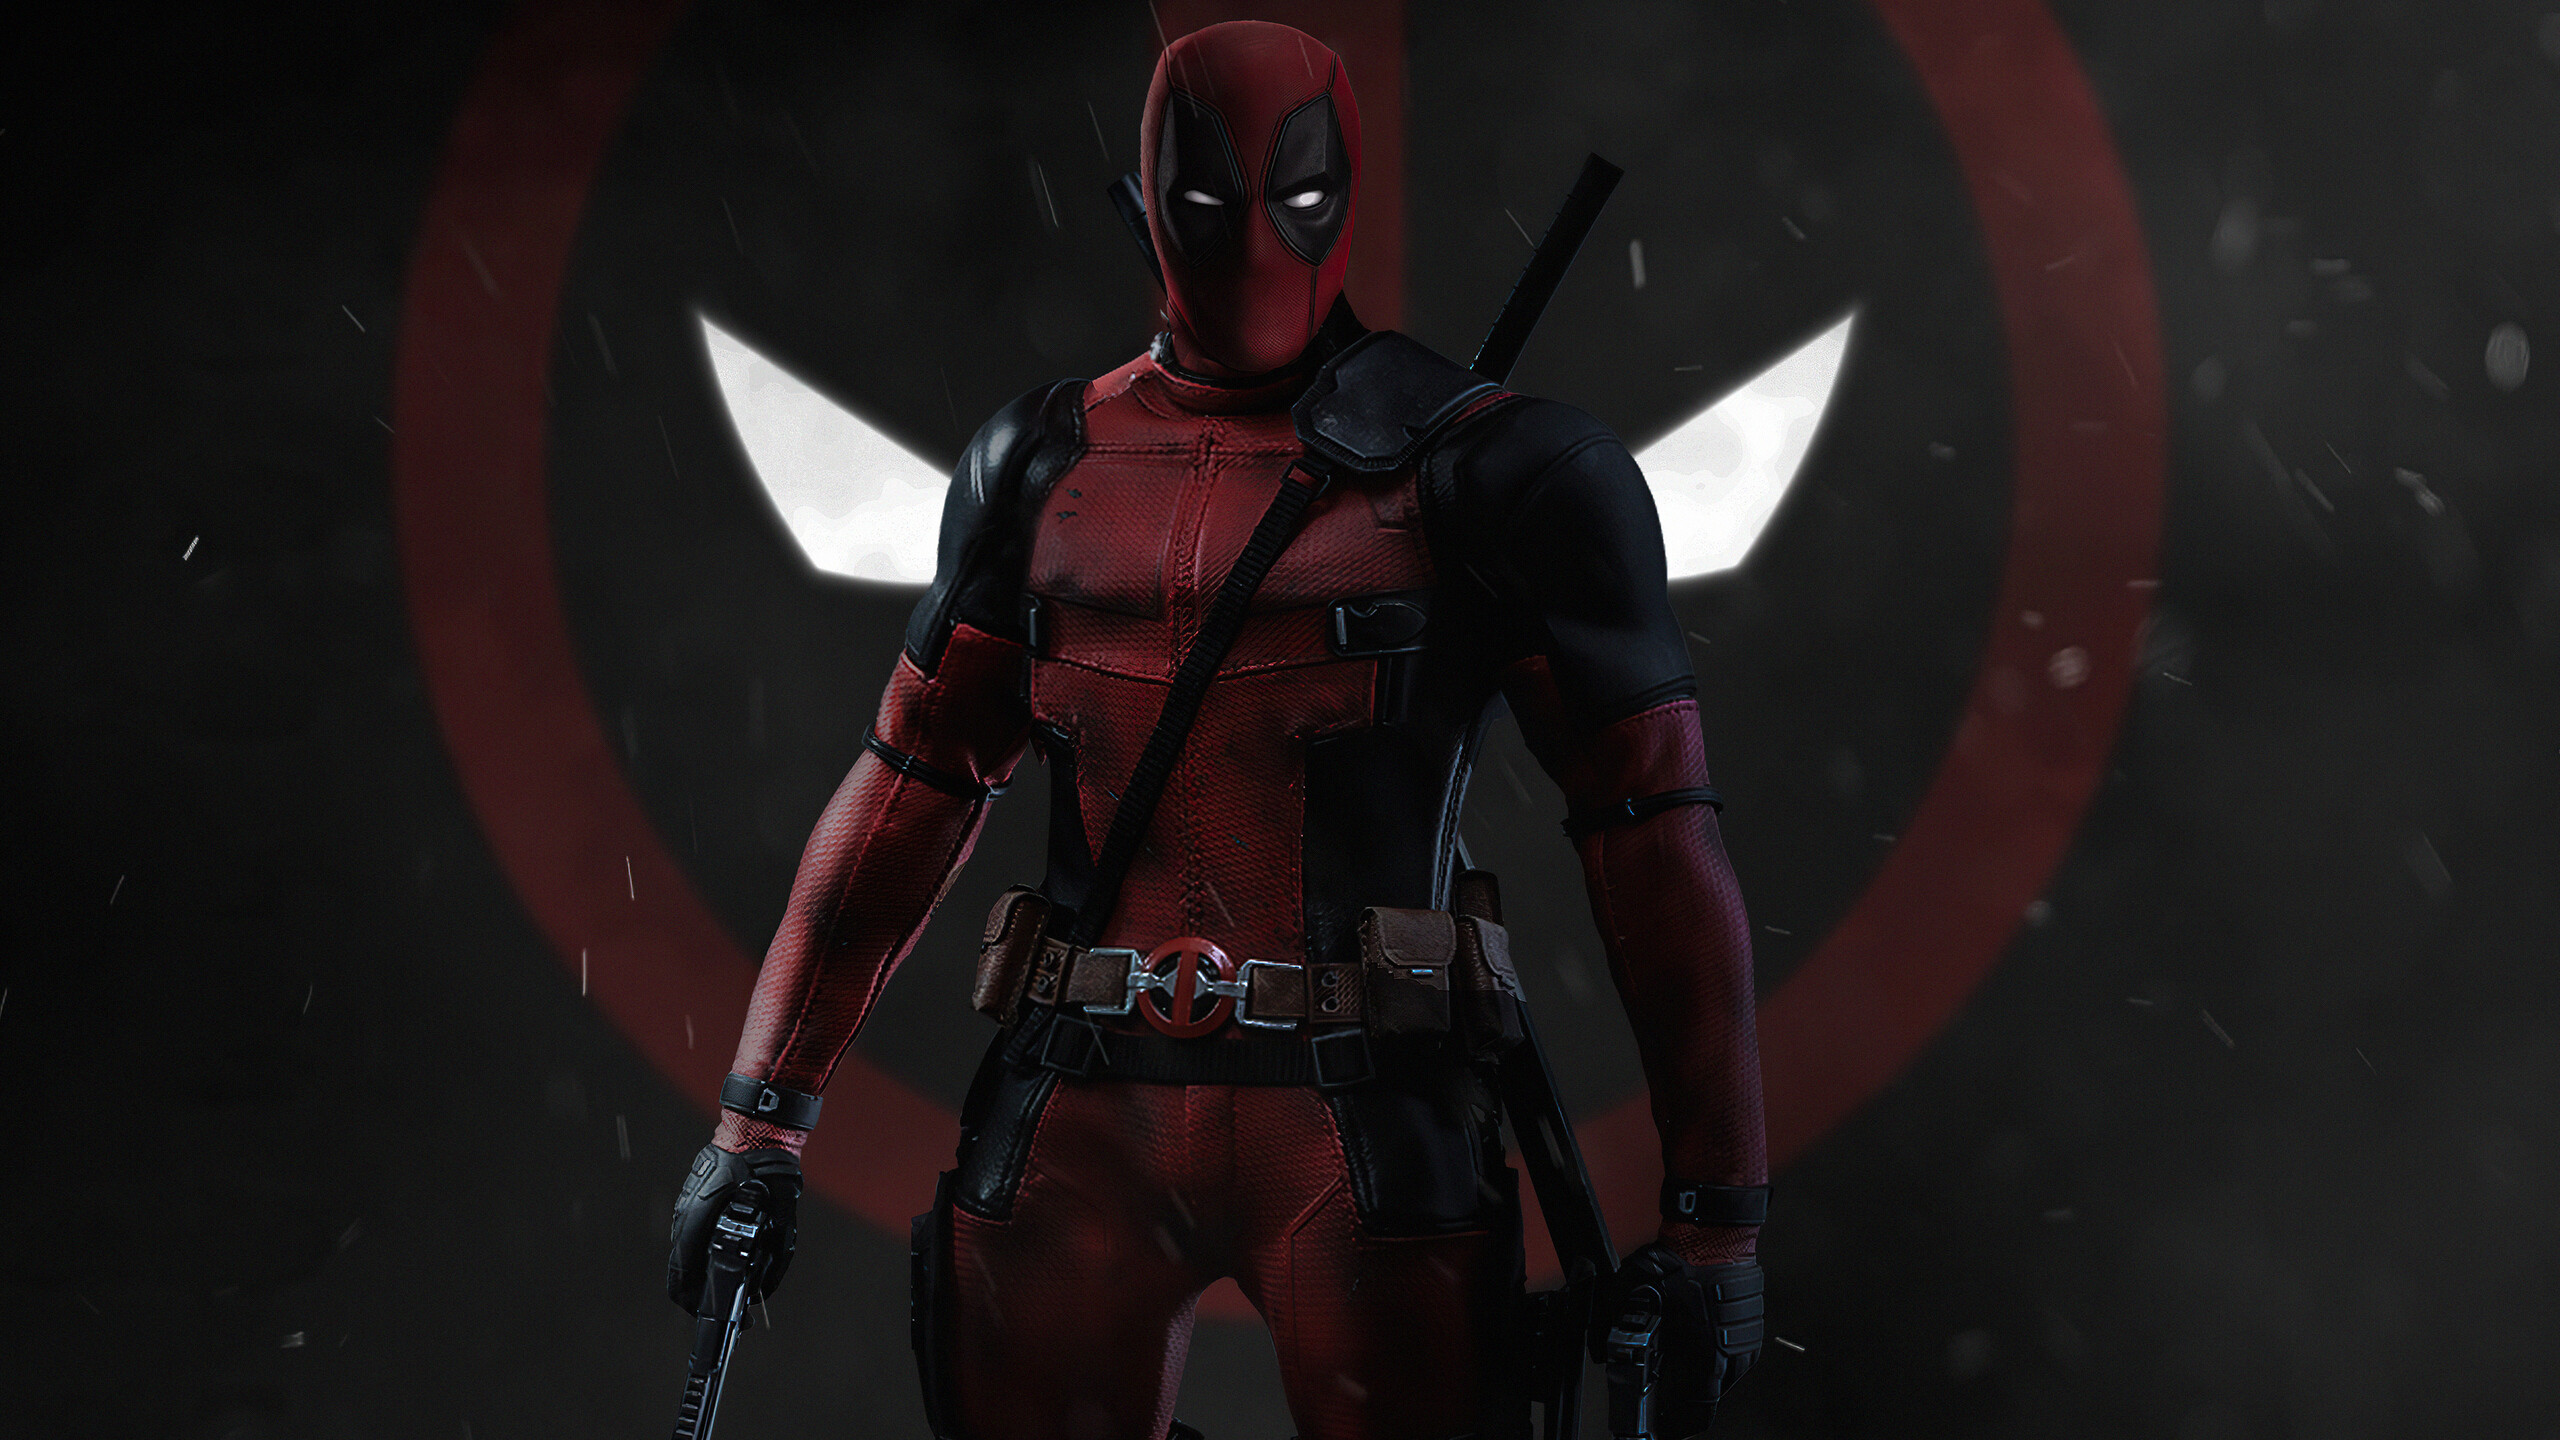 Deadpool: Known for his tendency to joke incessantly and break the fourth wall for humorous effect. 2560x1440 HD Background.